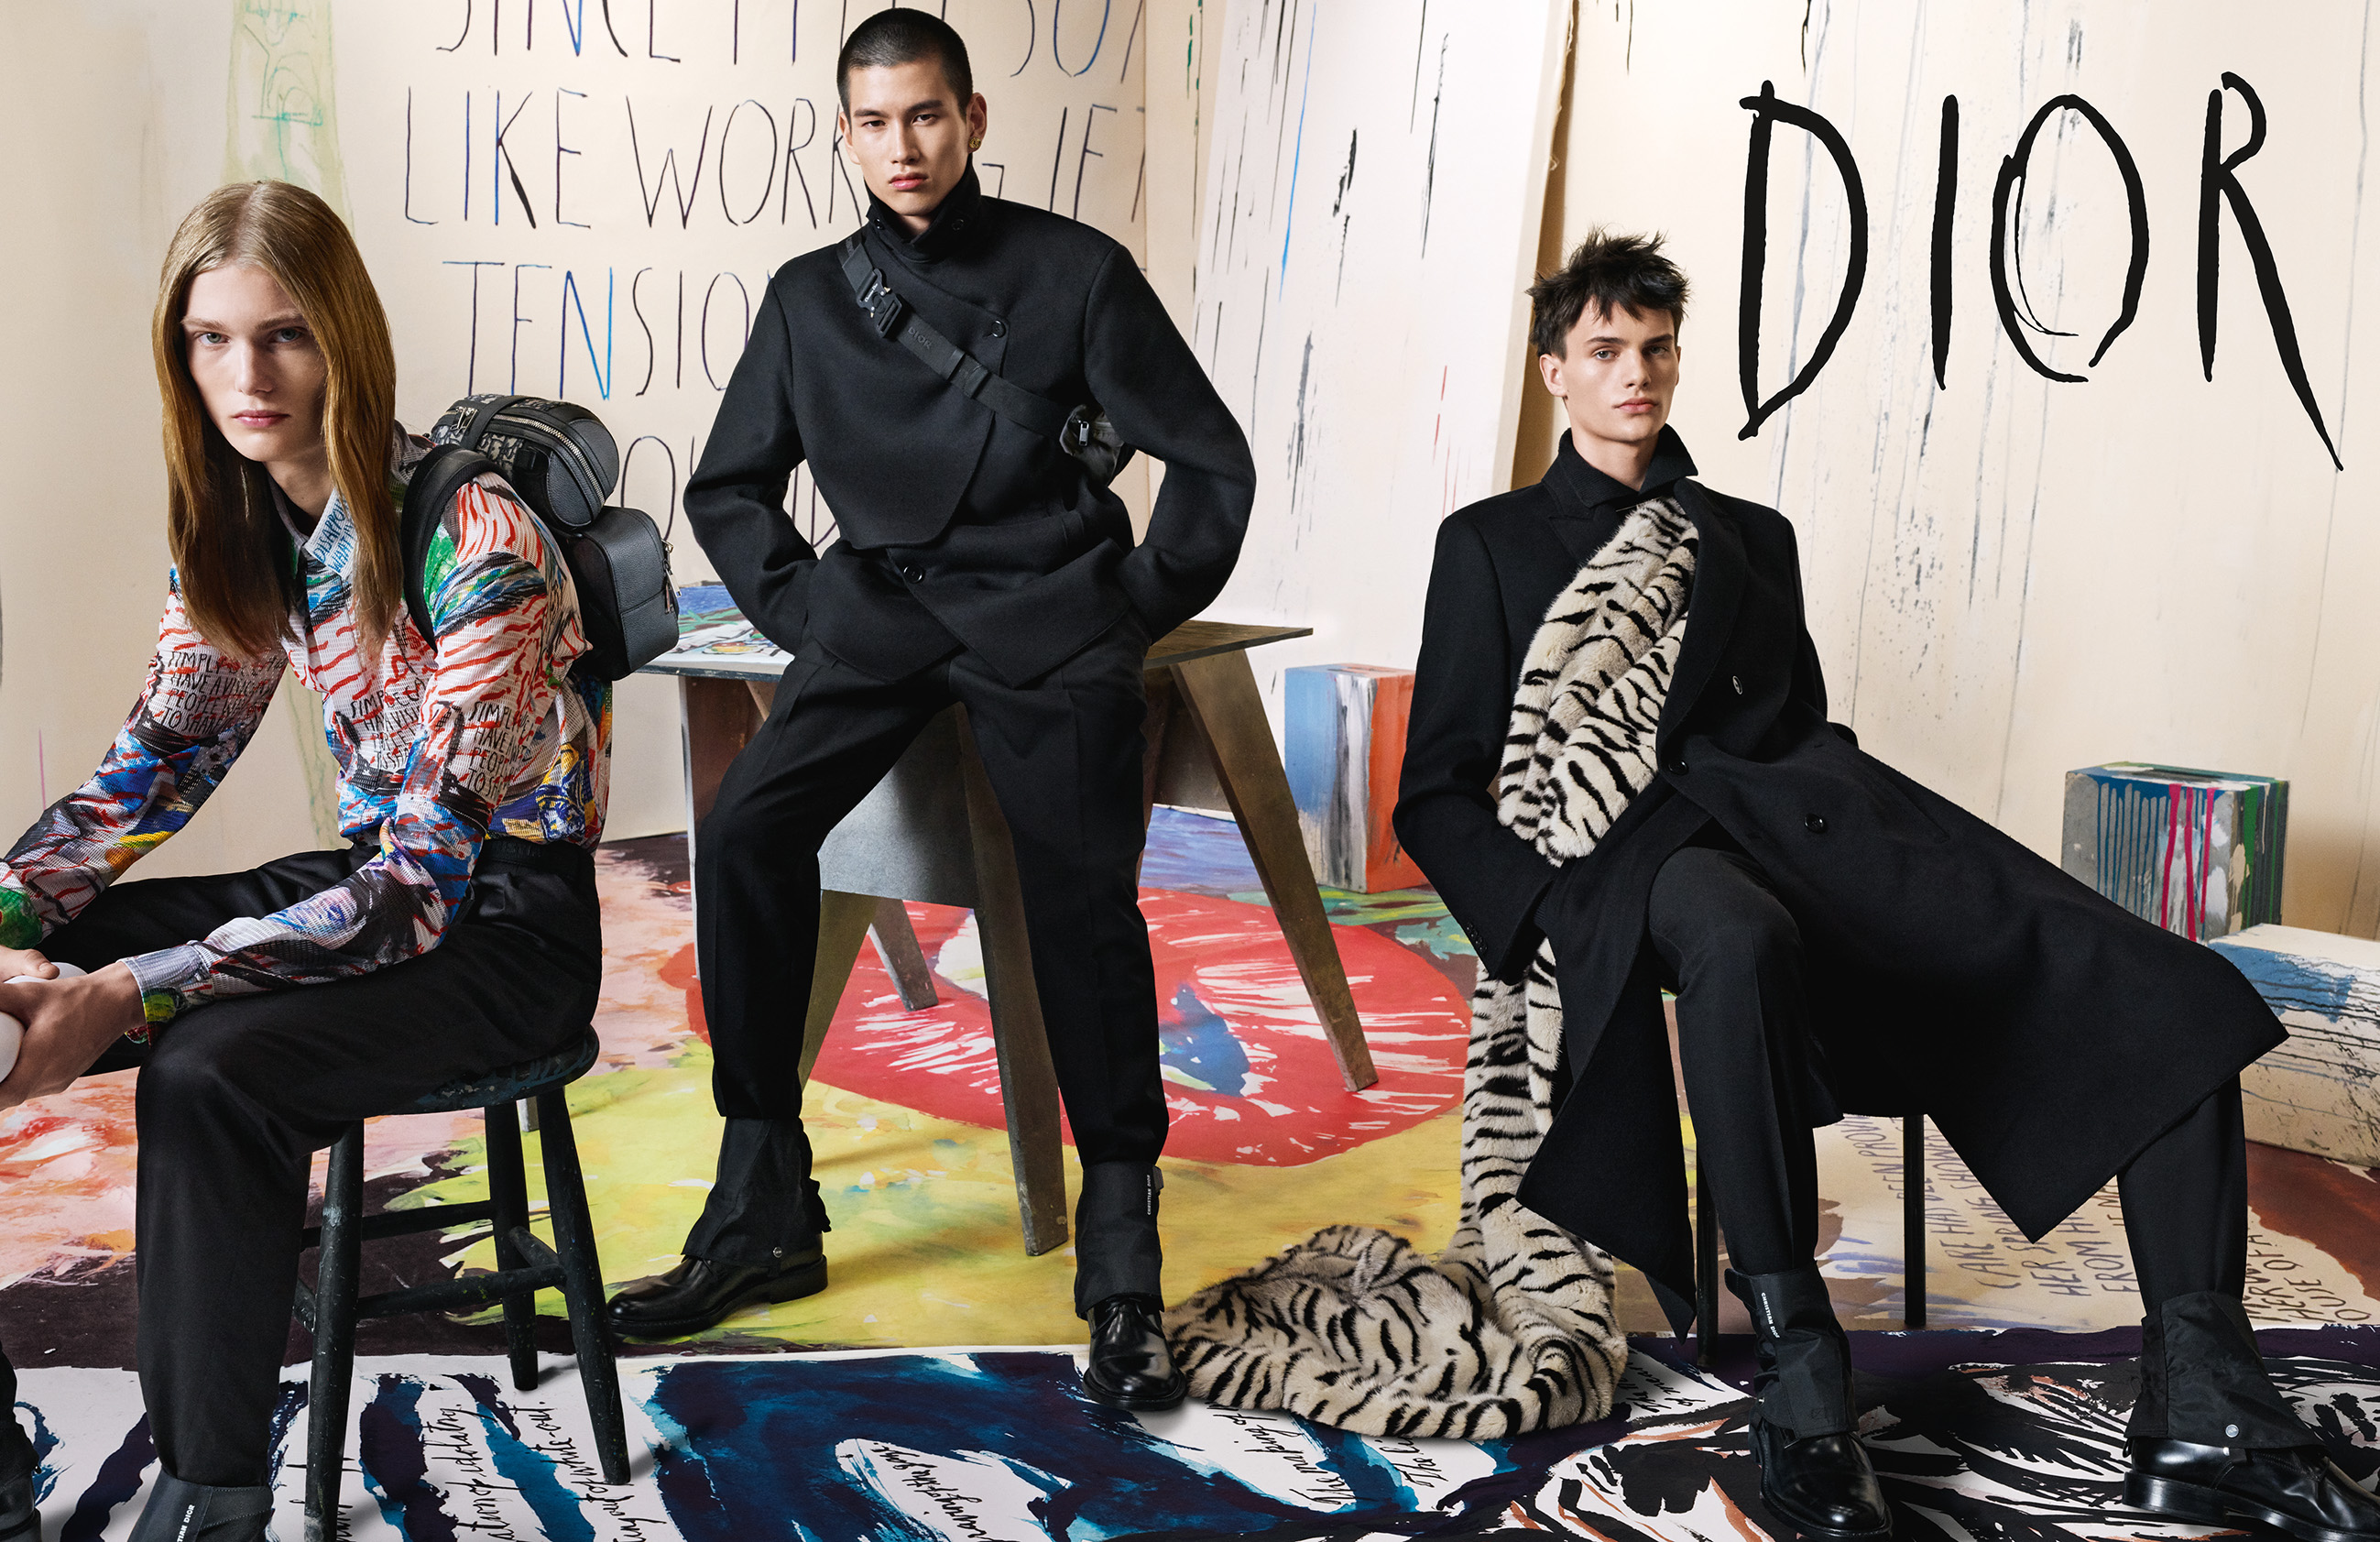 The new Dior Homme campaign celebrates the work of Raymond Pettibon